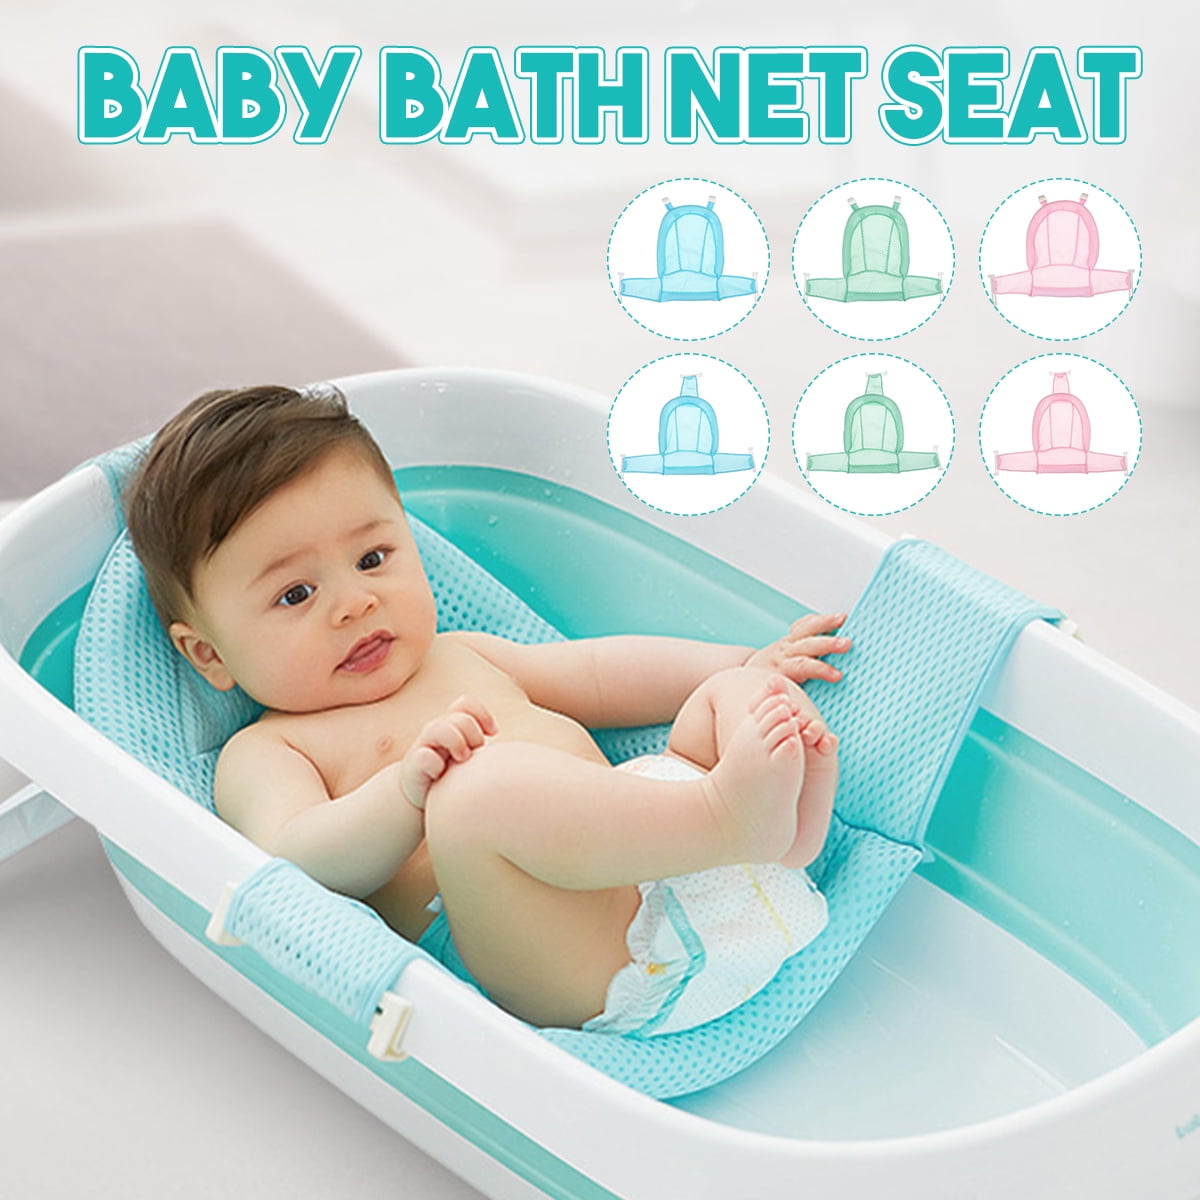 Newborn Bath Cushion Seat Support Net Bathing Mat,Anti-Slip Soft Comfort Mesh Shower Lounger Basin Pad W/Sling & Pillow,for Infant to Toddler 0-12 Months Blue Baby Bathtub Seat for Sit-up Bathing 